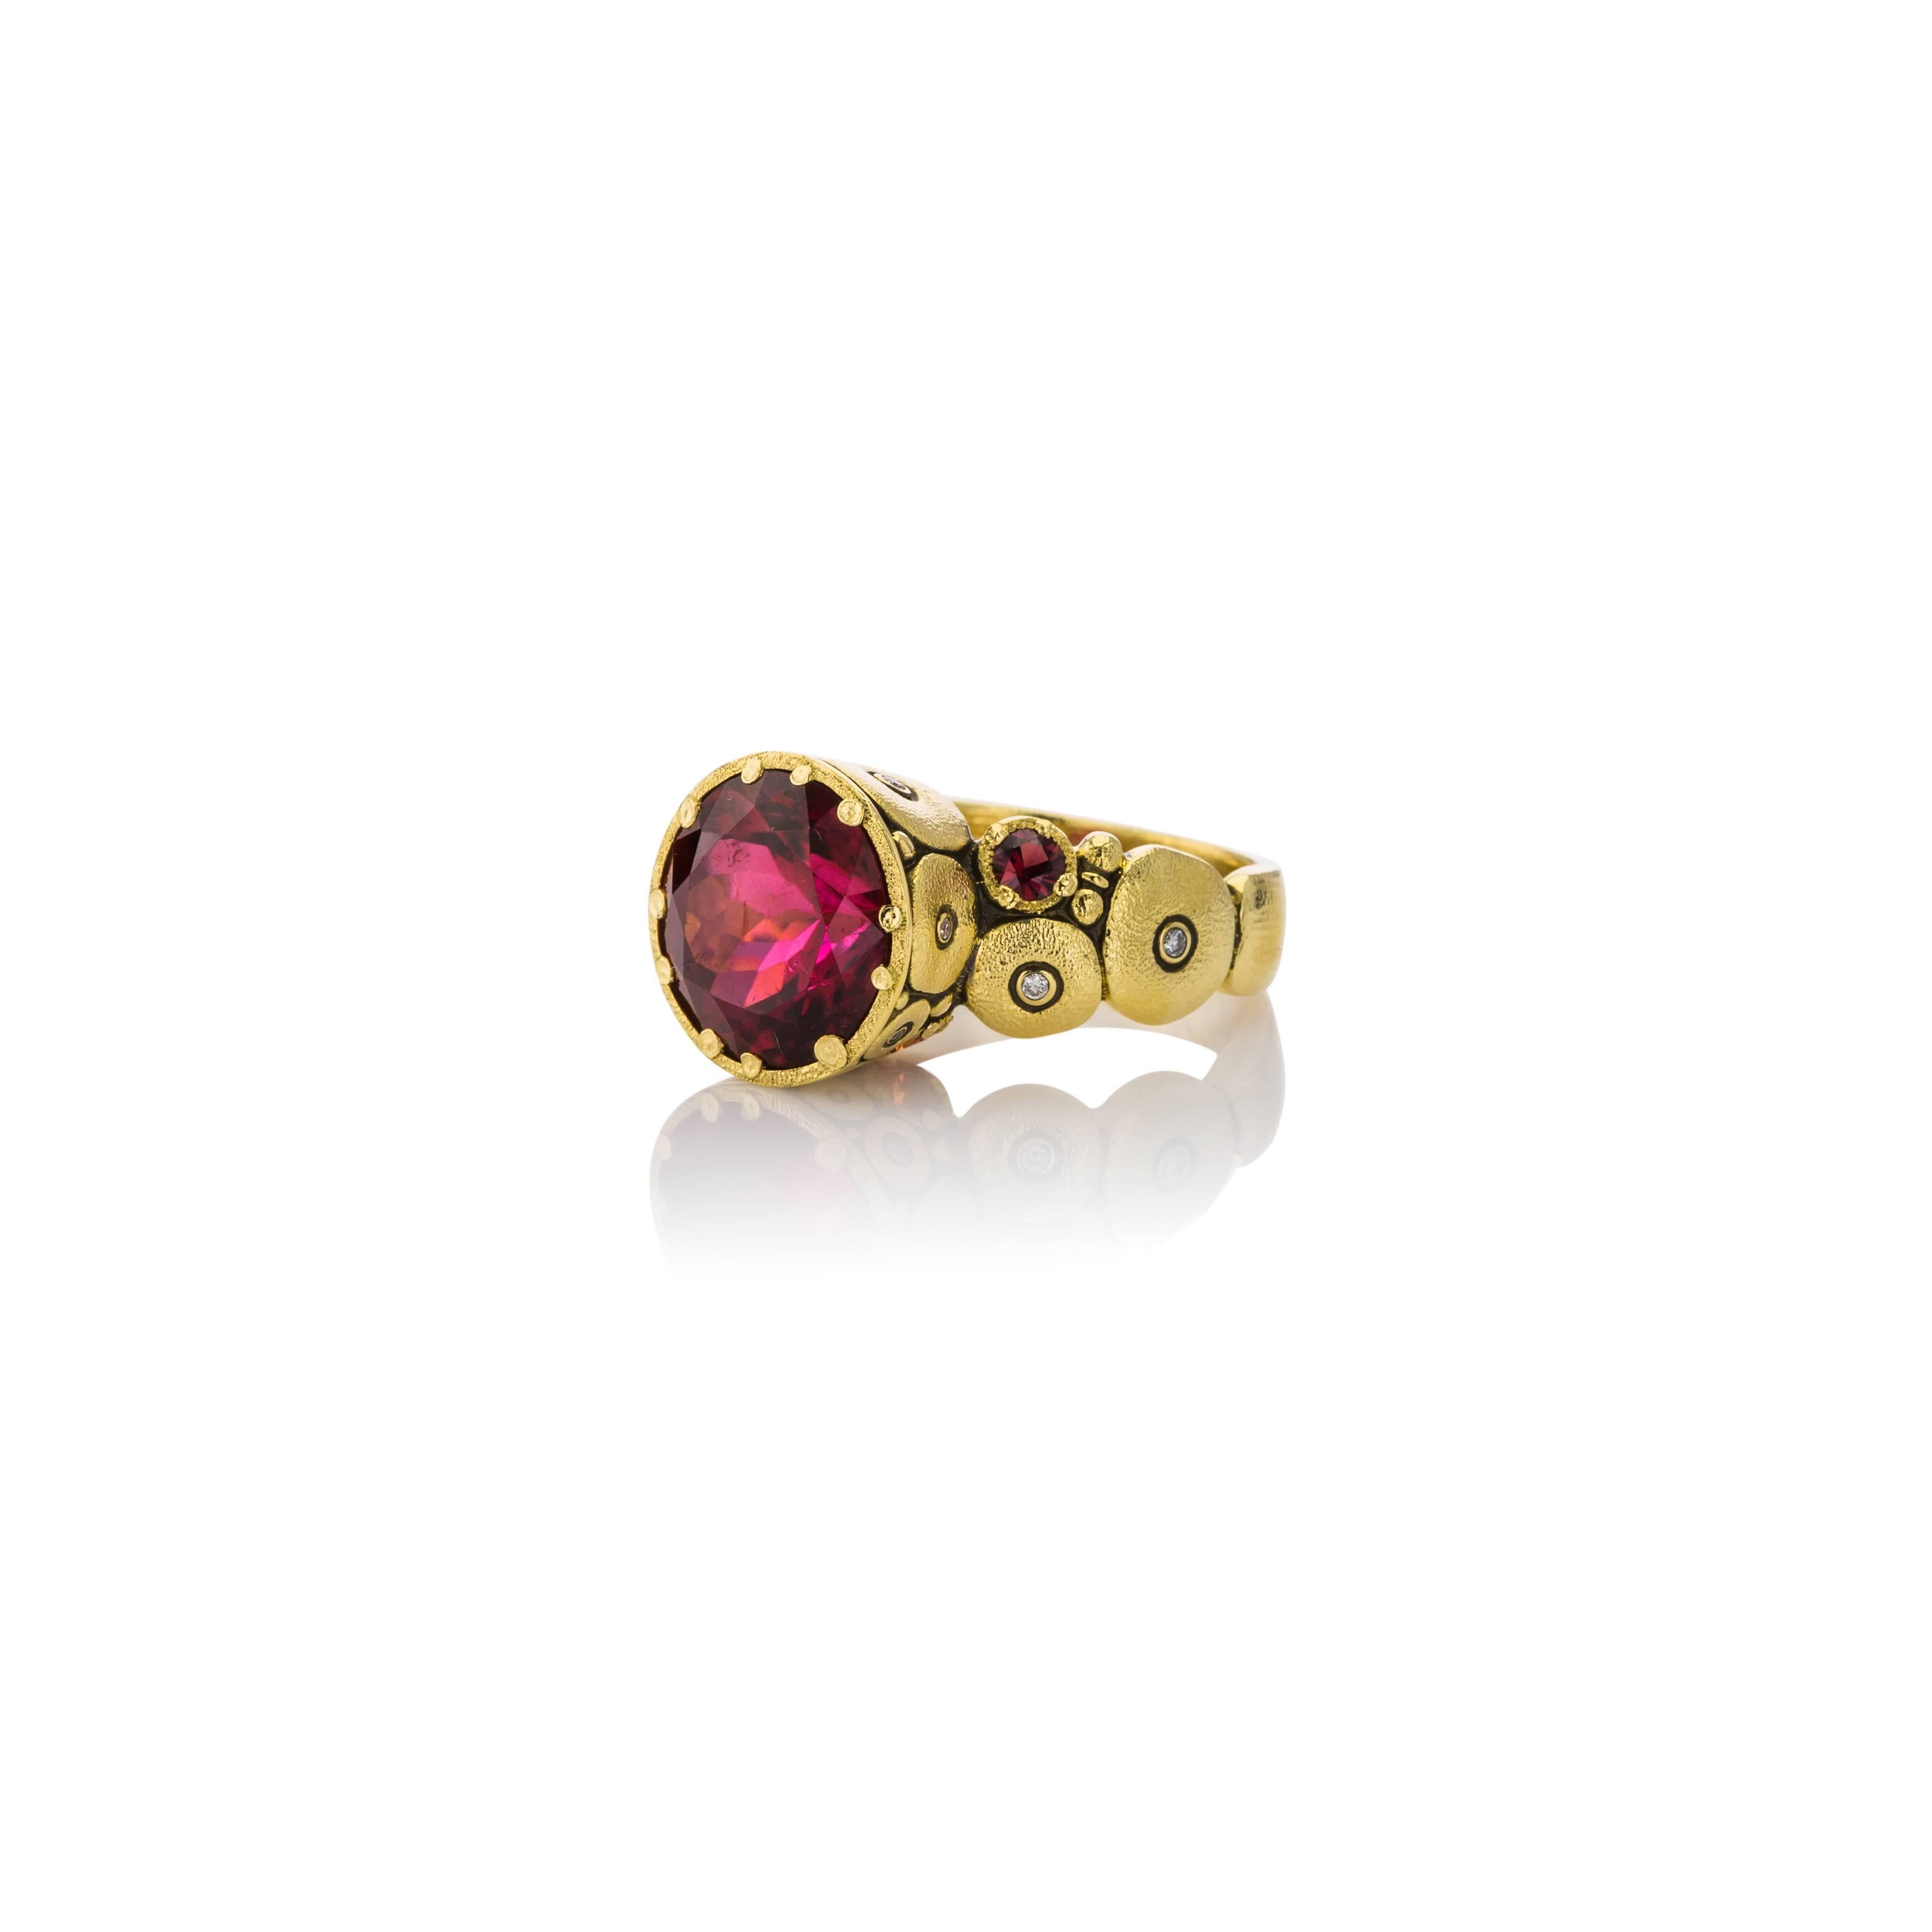 Stunning Alex Sepkus Ring in 18kt Yellow Gold. Center bezel set 7.04ct Red Tourmaline, .50cts bezel set diamonds and.16ct red bezel set sapphires.  Finger Size 7.  Can be sized to fit. 